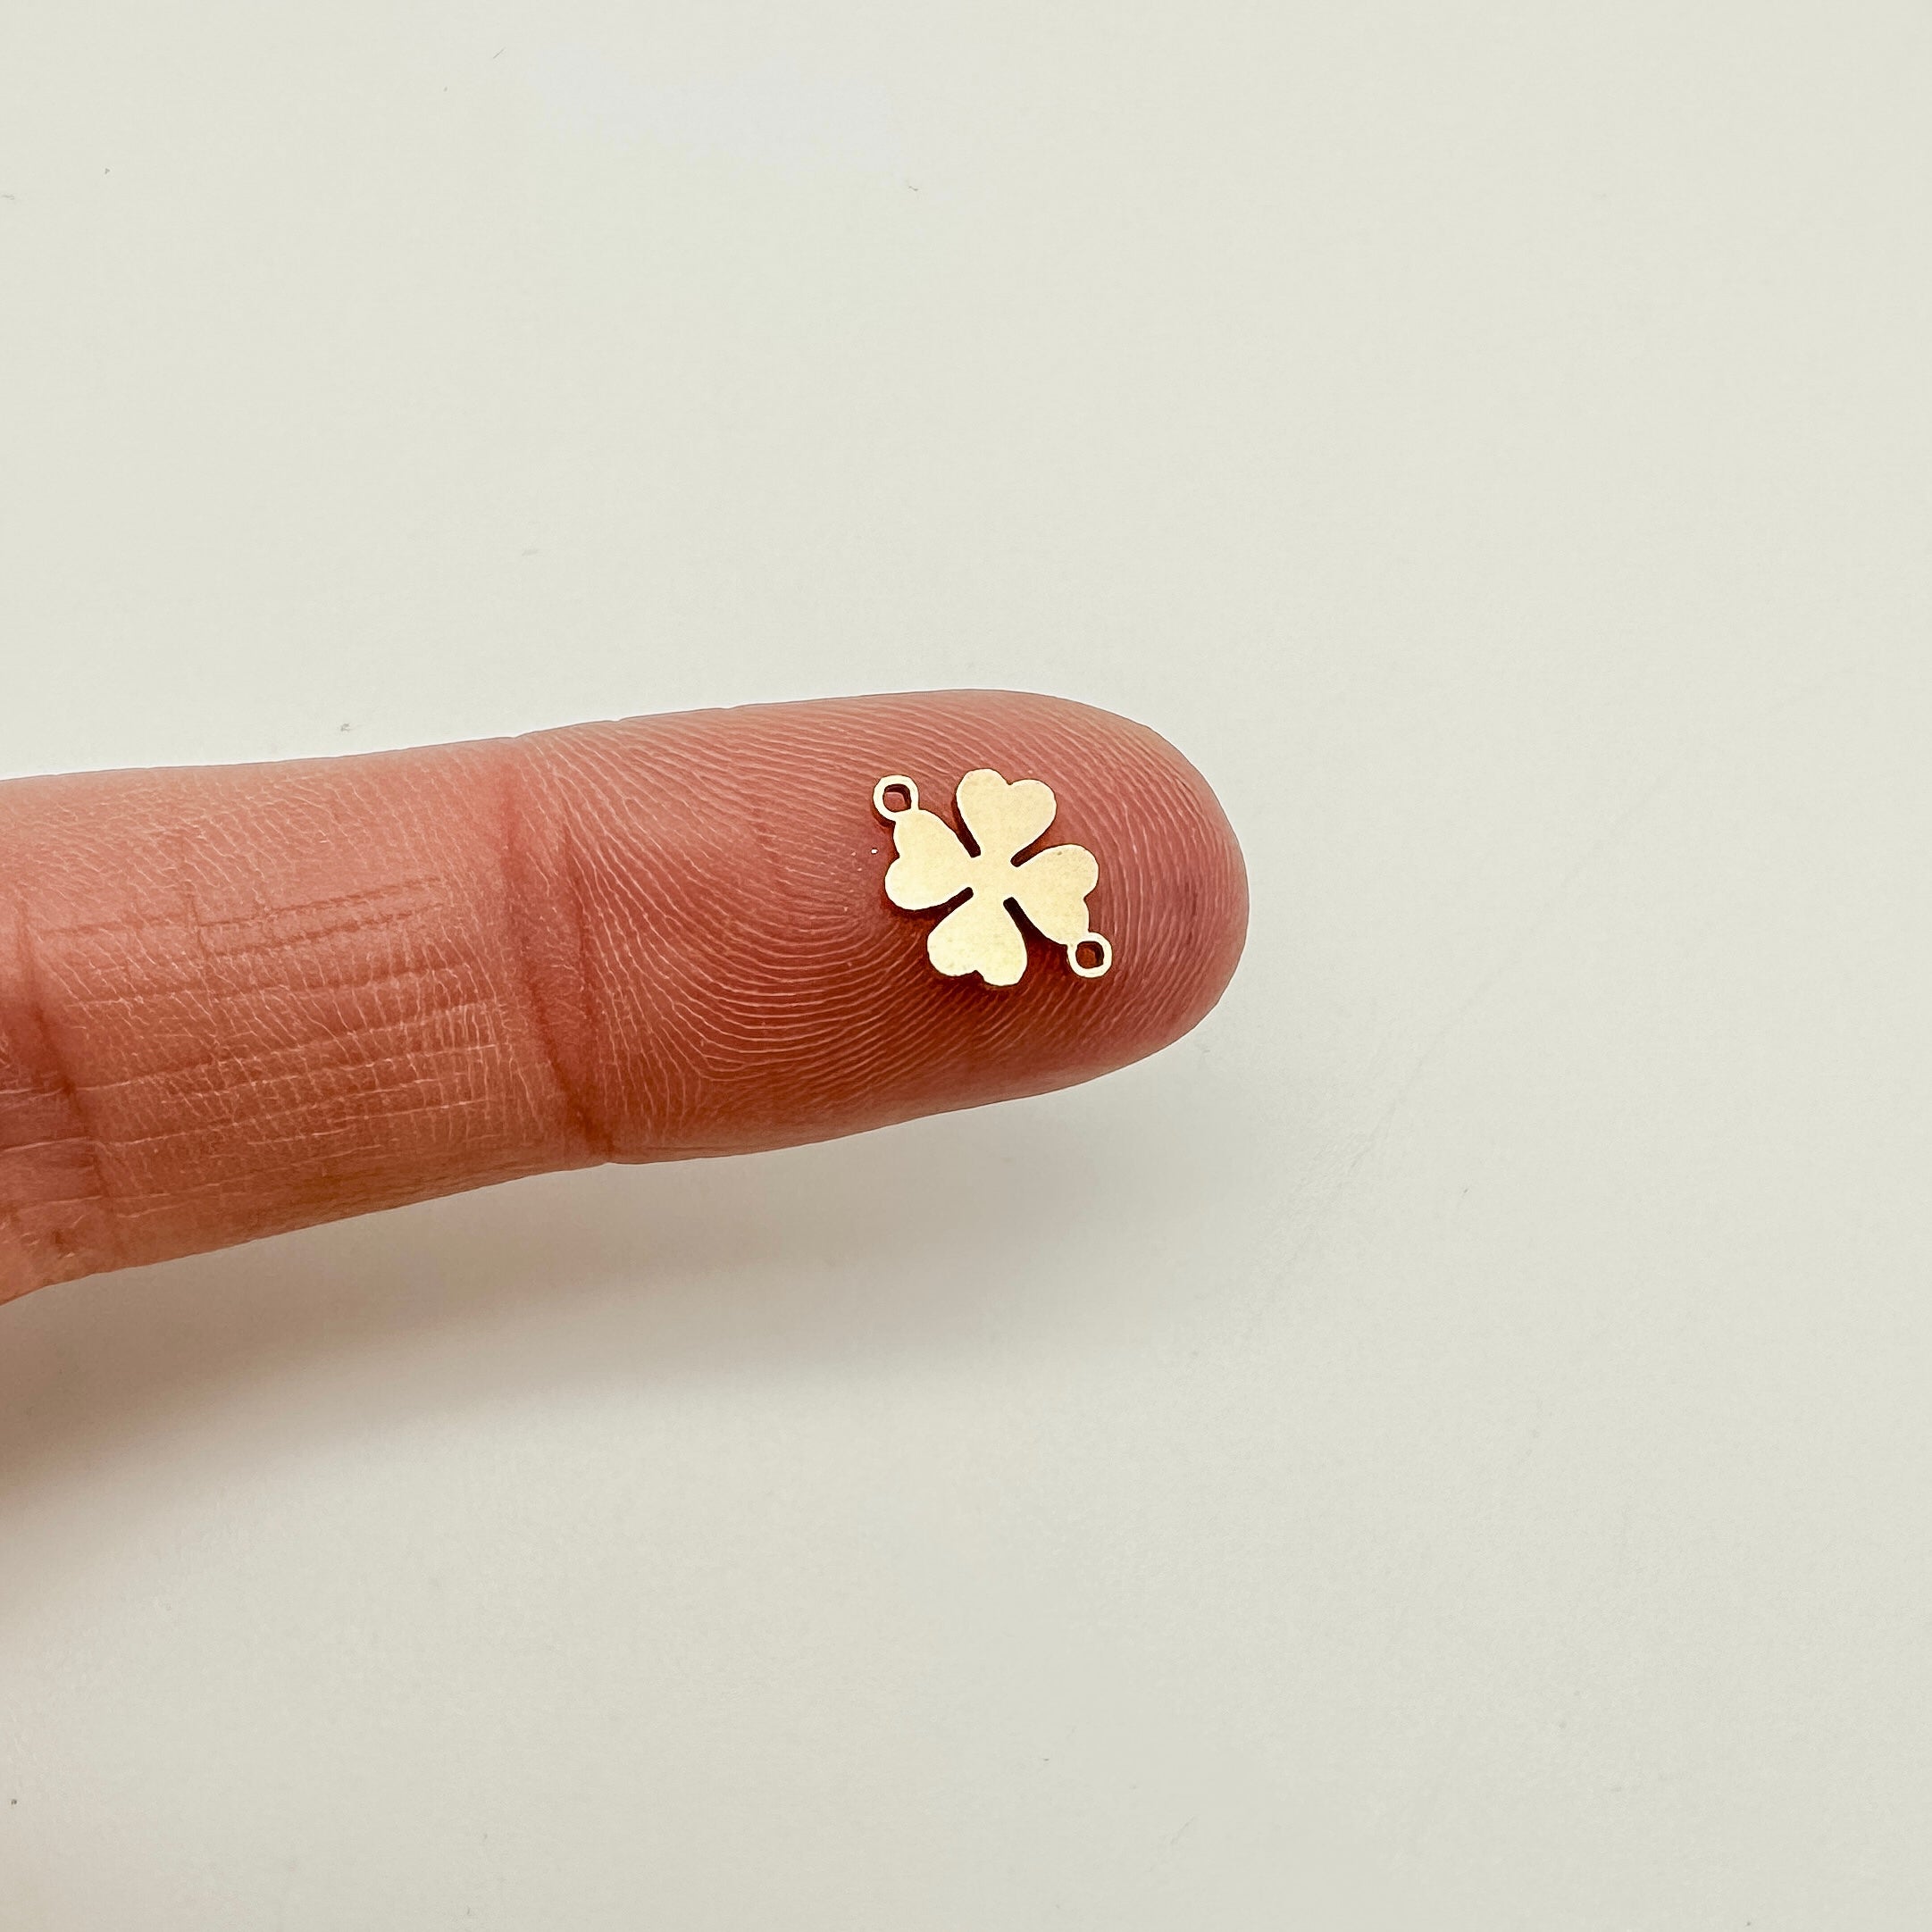 clover connector, gold filled clover charm, gold filled clover connector, st. patrick's day charm, gold filled charms, permanent jewelry connectors